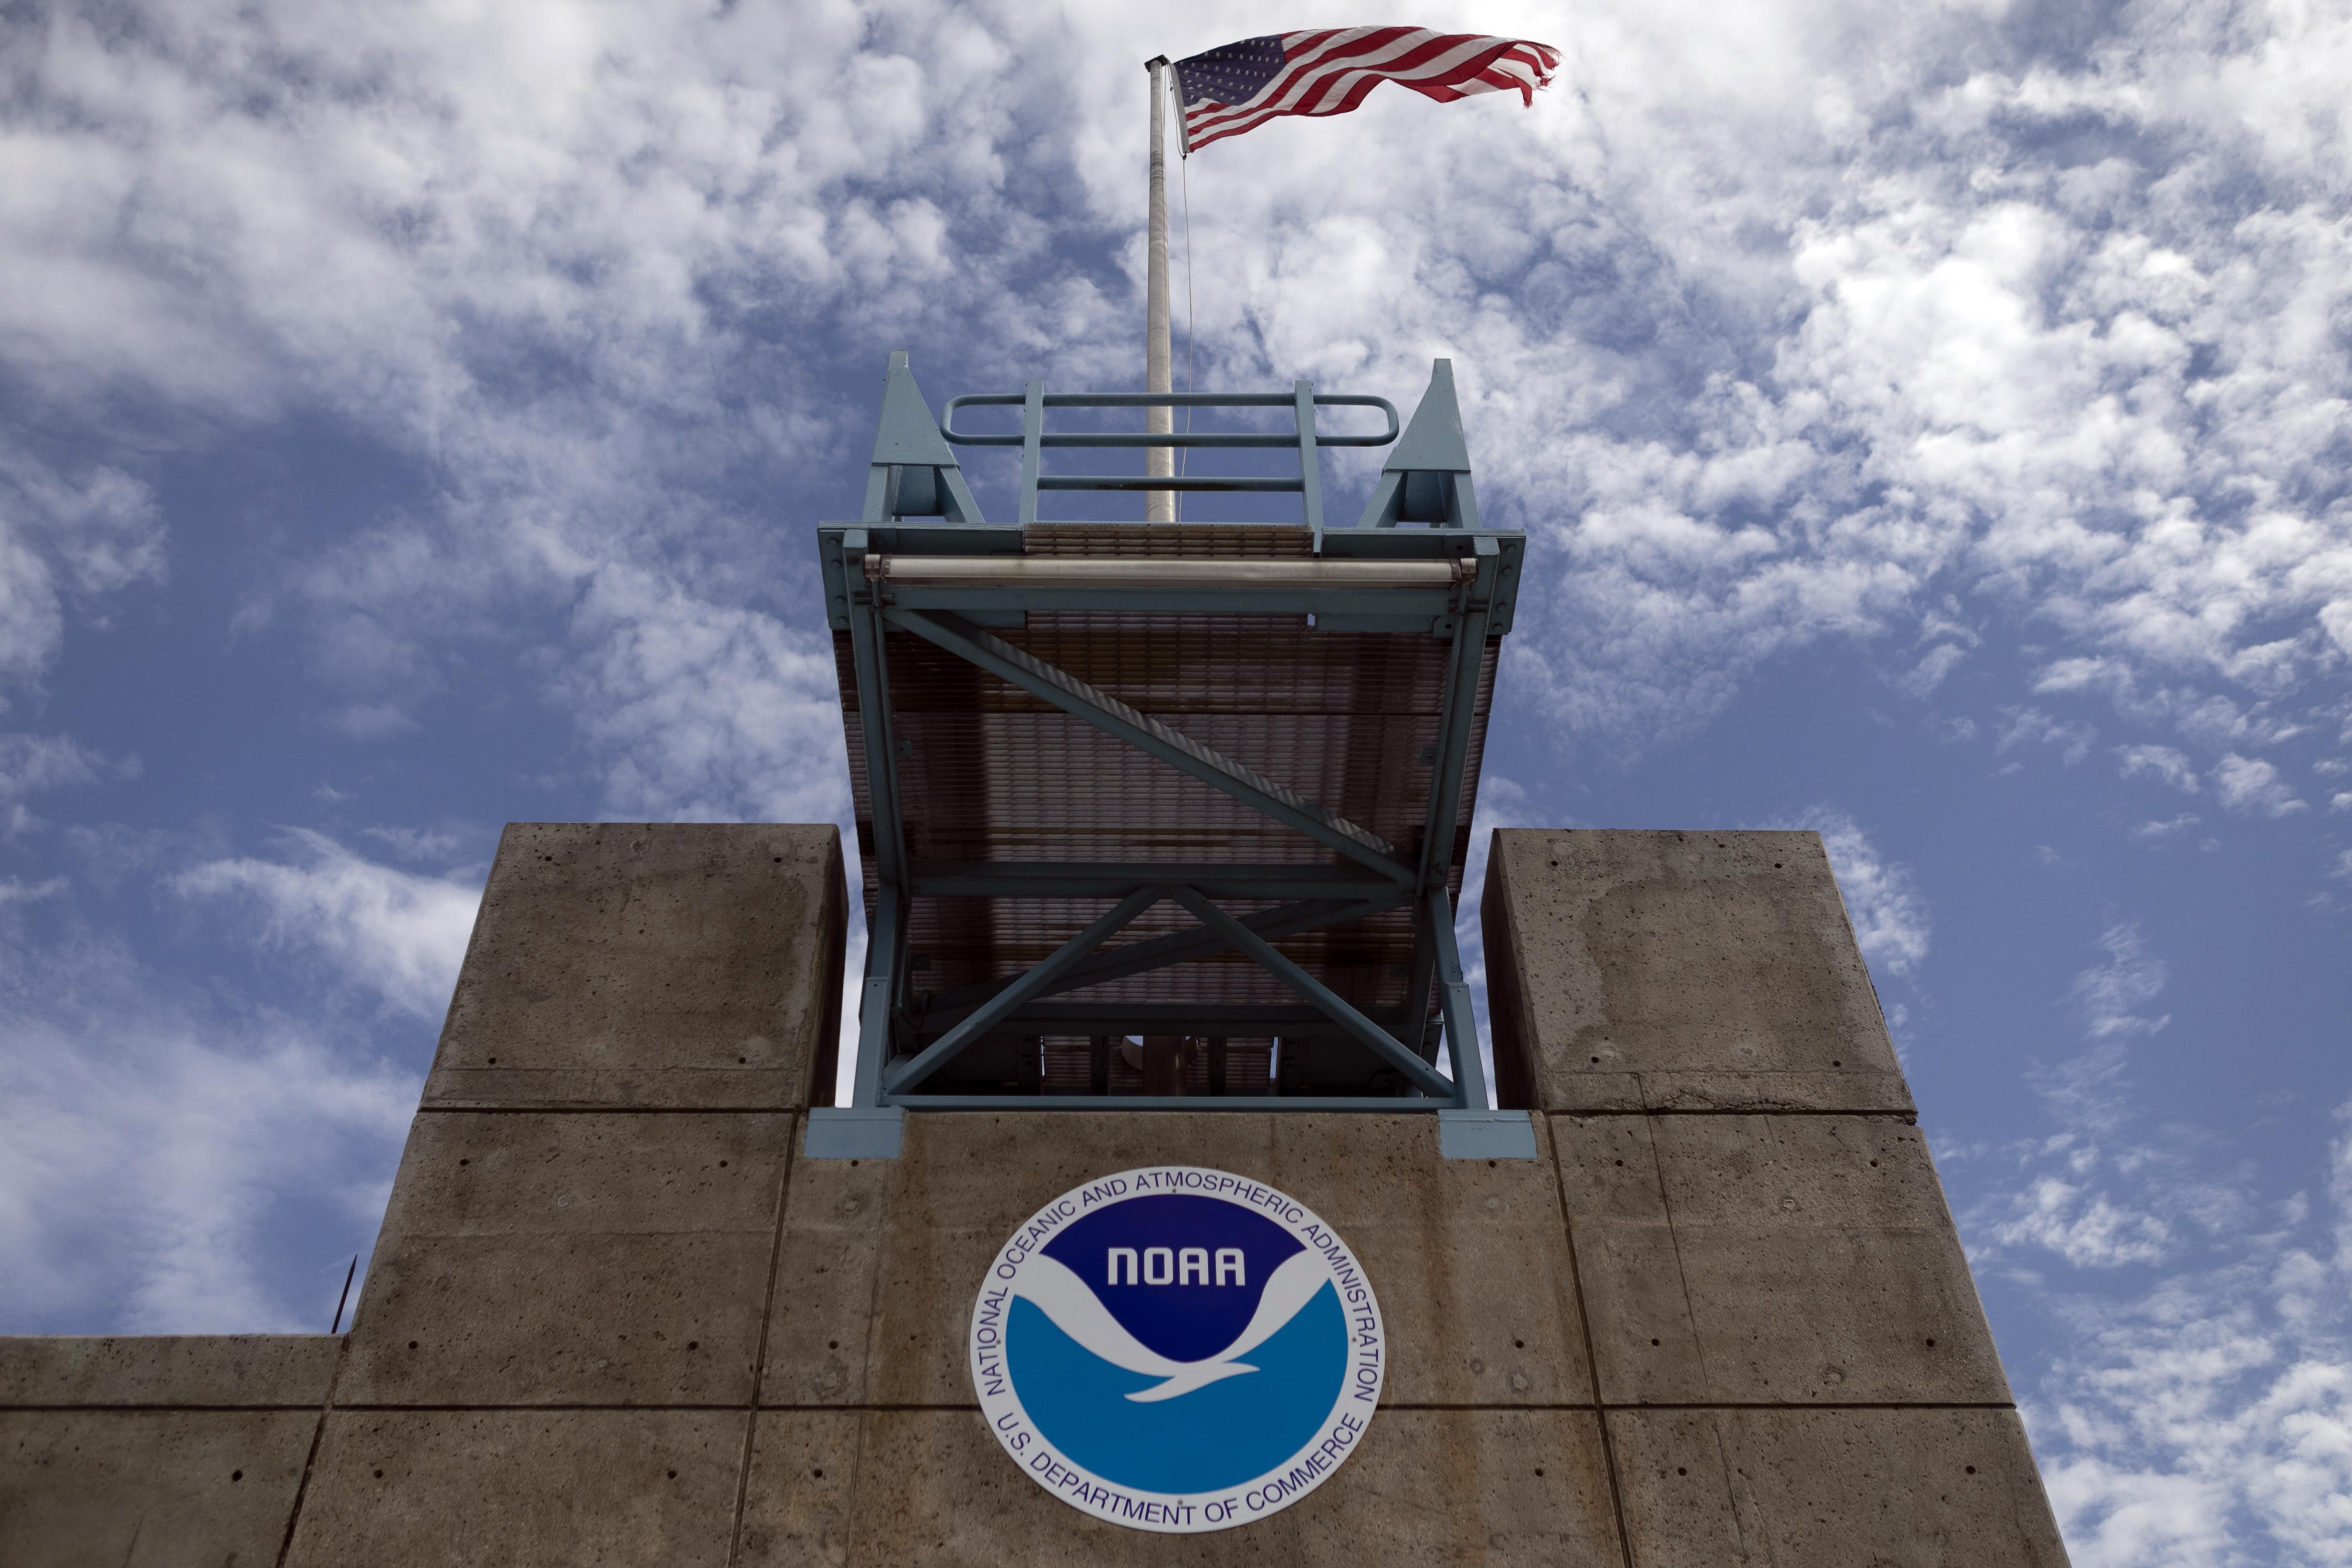 A cement building with the NOAA logo on the front and a flag flying over top.